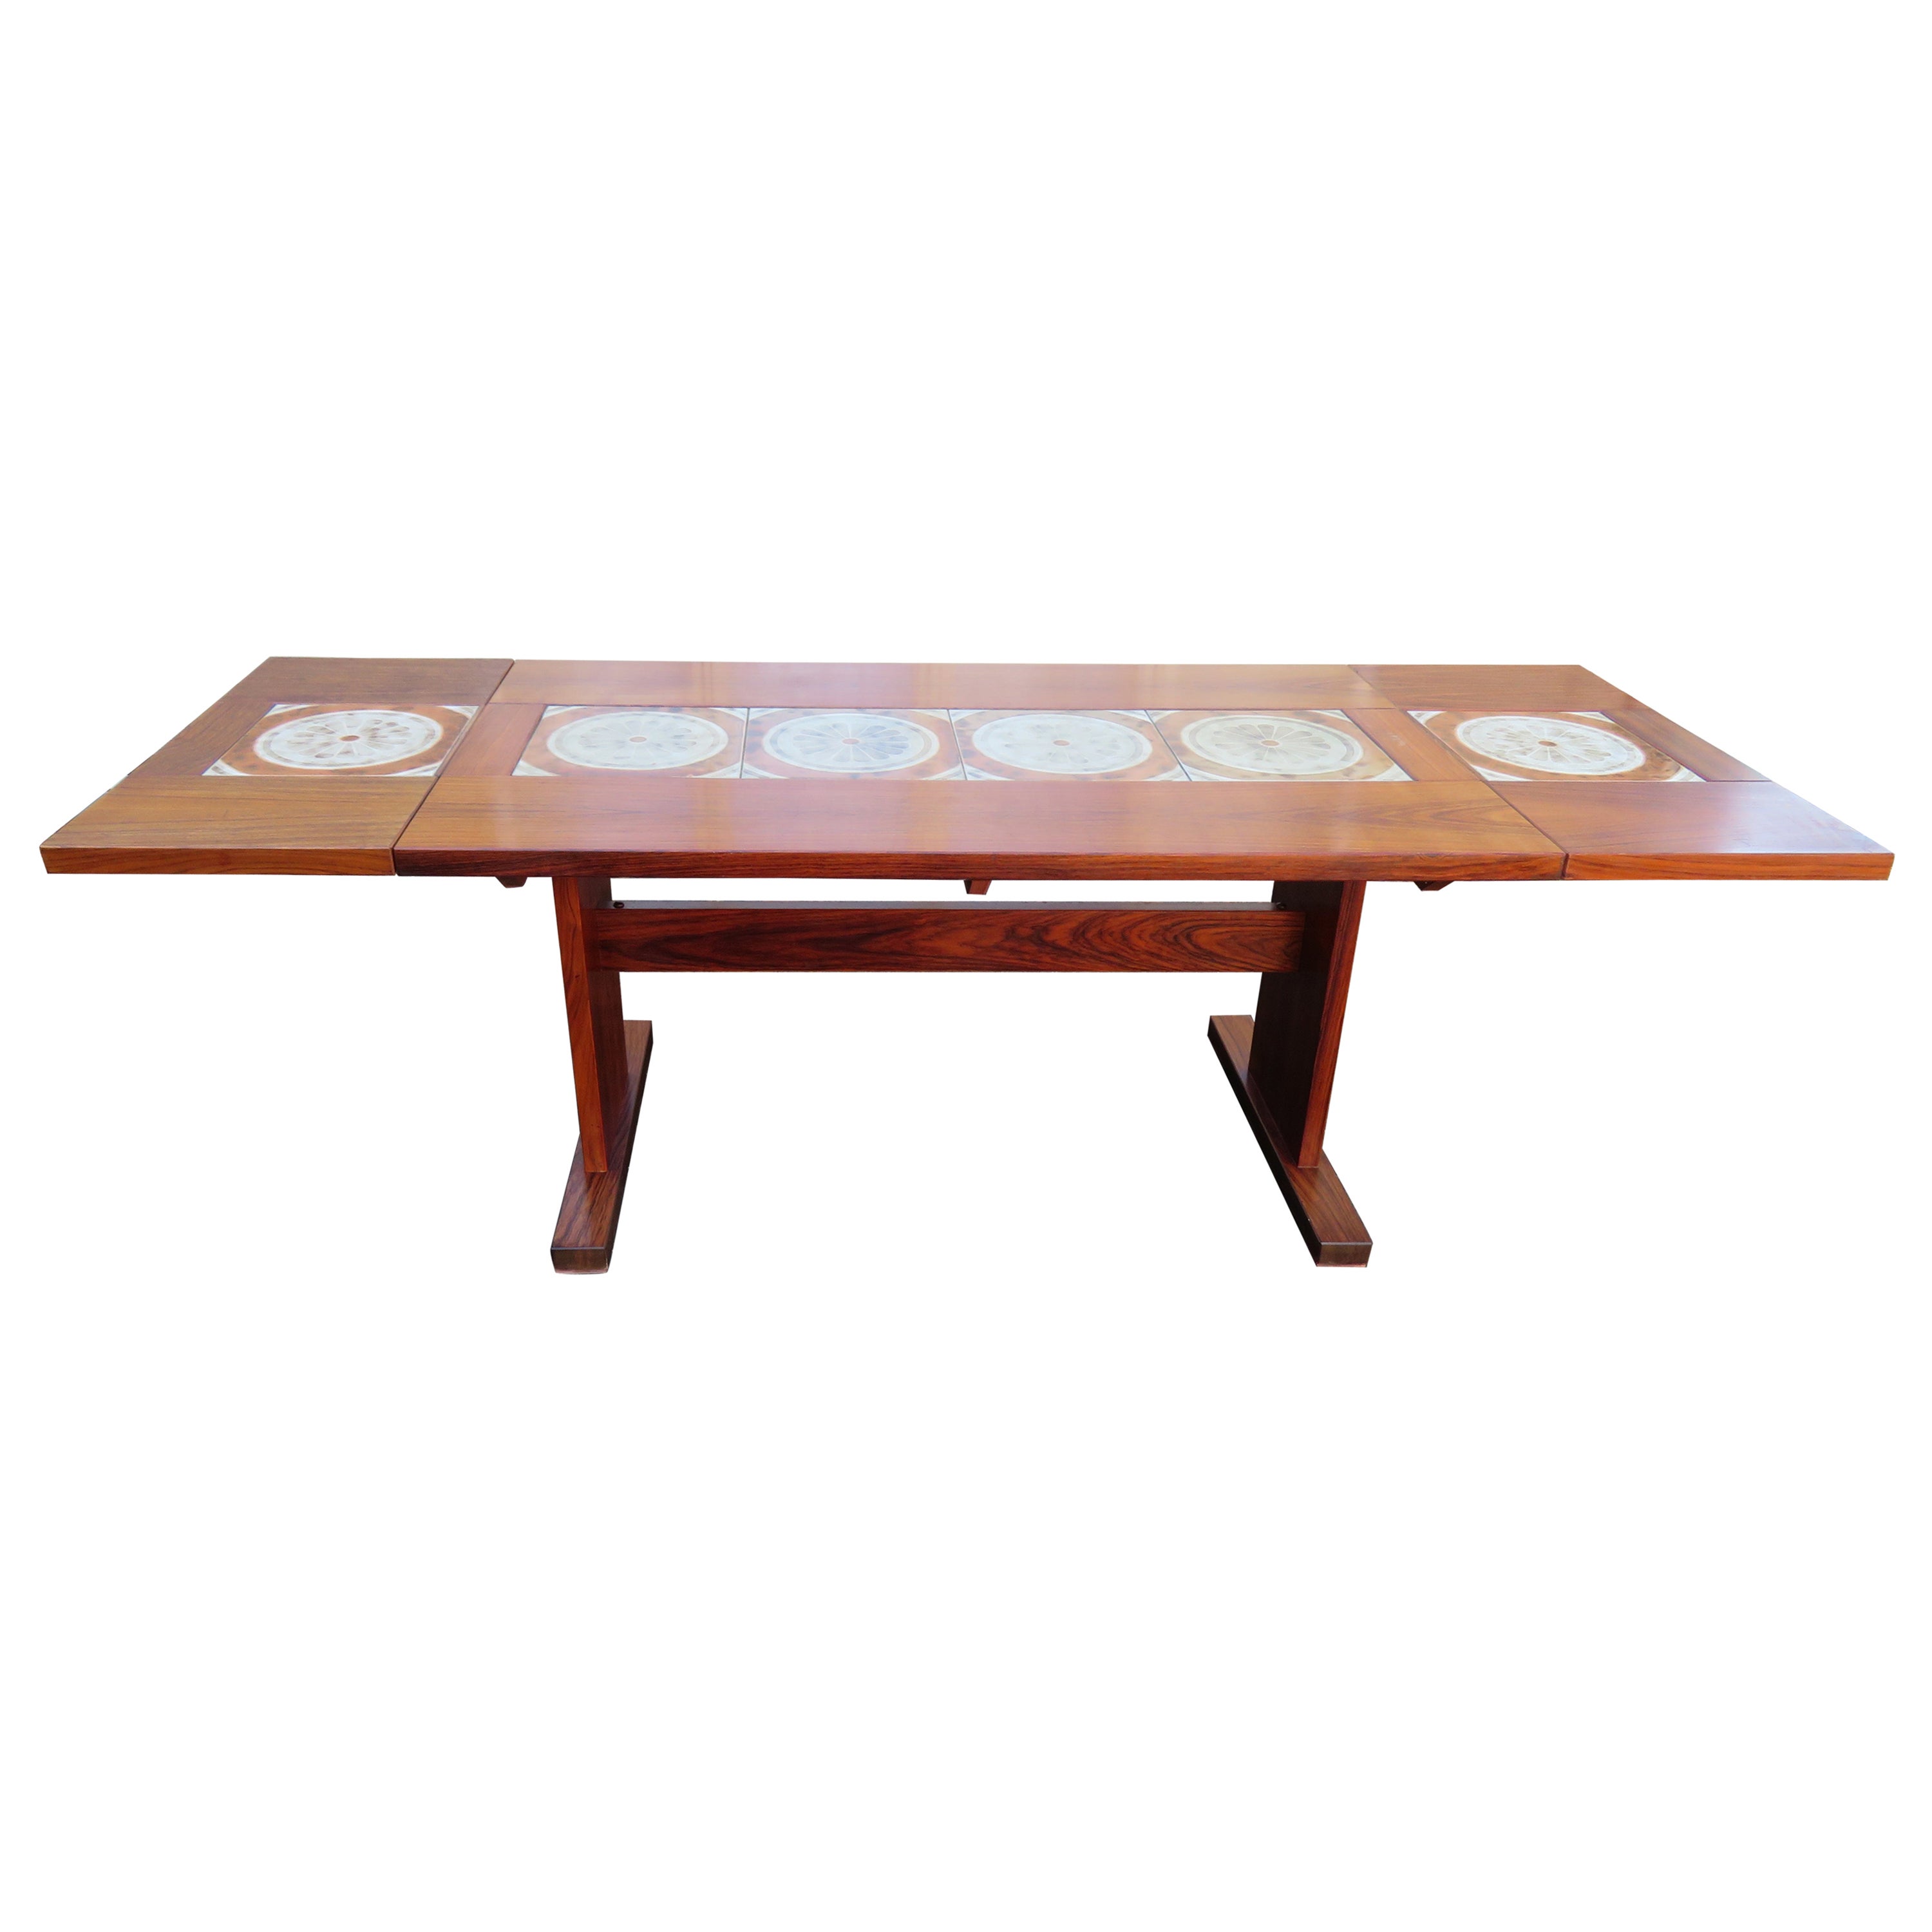 1970s Ox Art Danish Rosewood Tile Drop Leaf Dining Table Midcentury For Sale